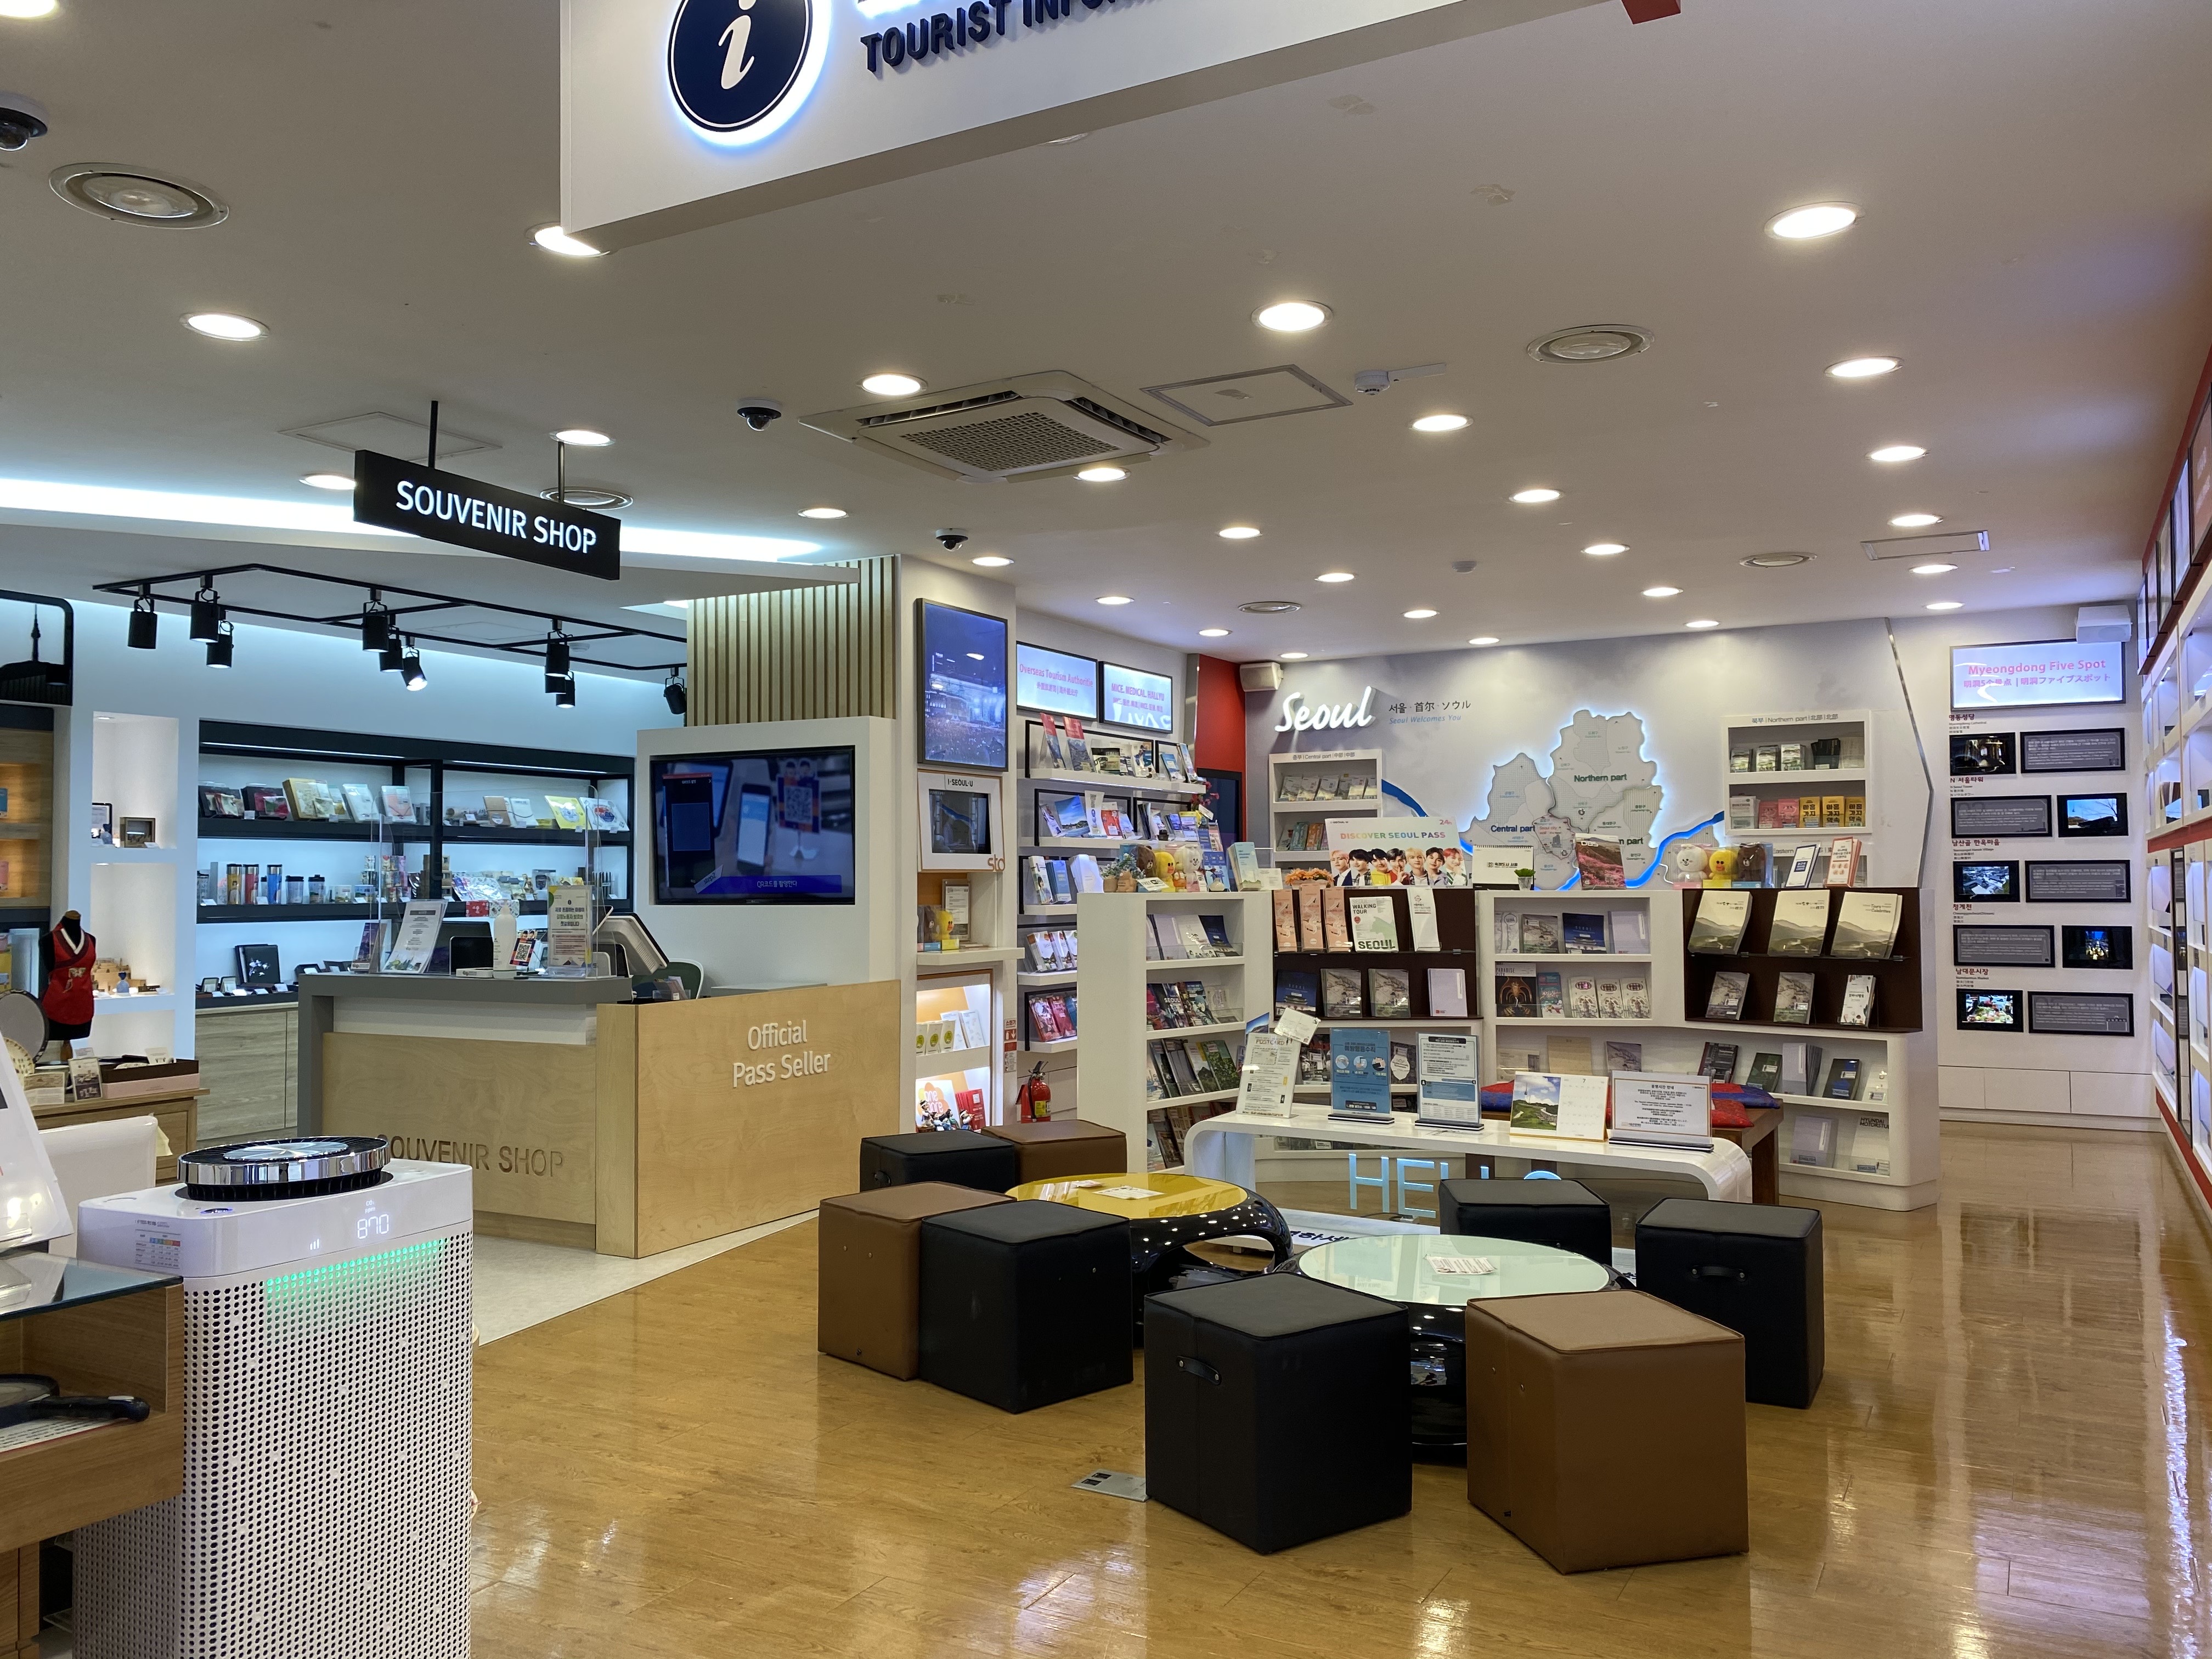 Myeongdong Tourist Information Center2 : Interior space large enough for wheelchair users with resting areas 